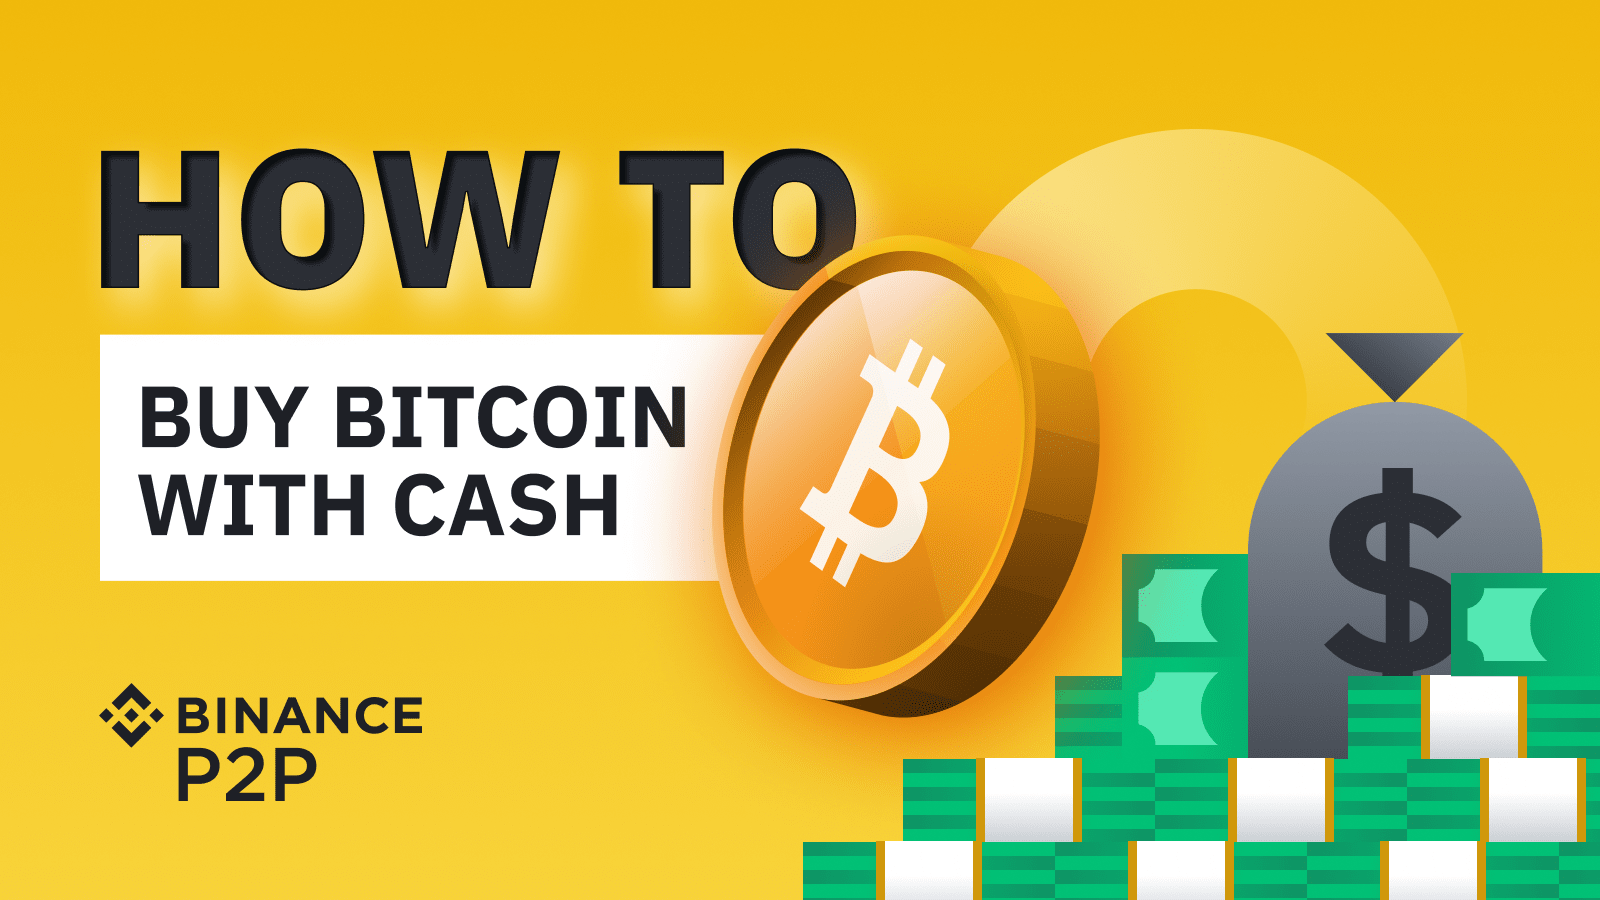 How to buy Bitcoin Cash : Step-by-step guide for buying Bitcoin Cash | Ledger